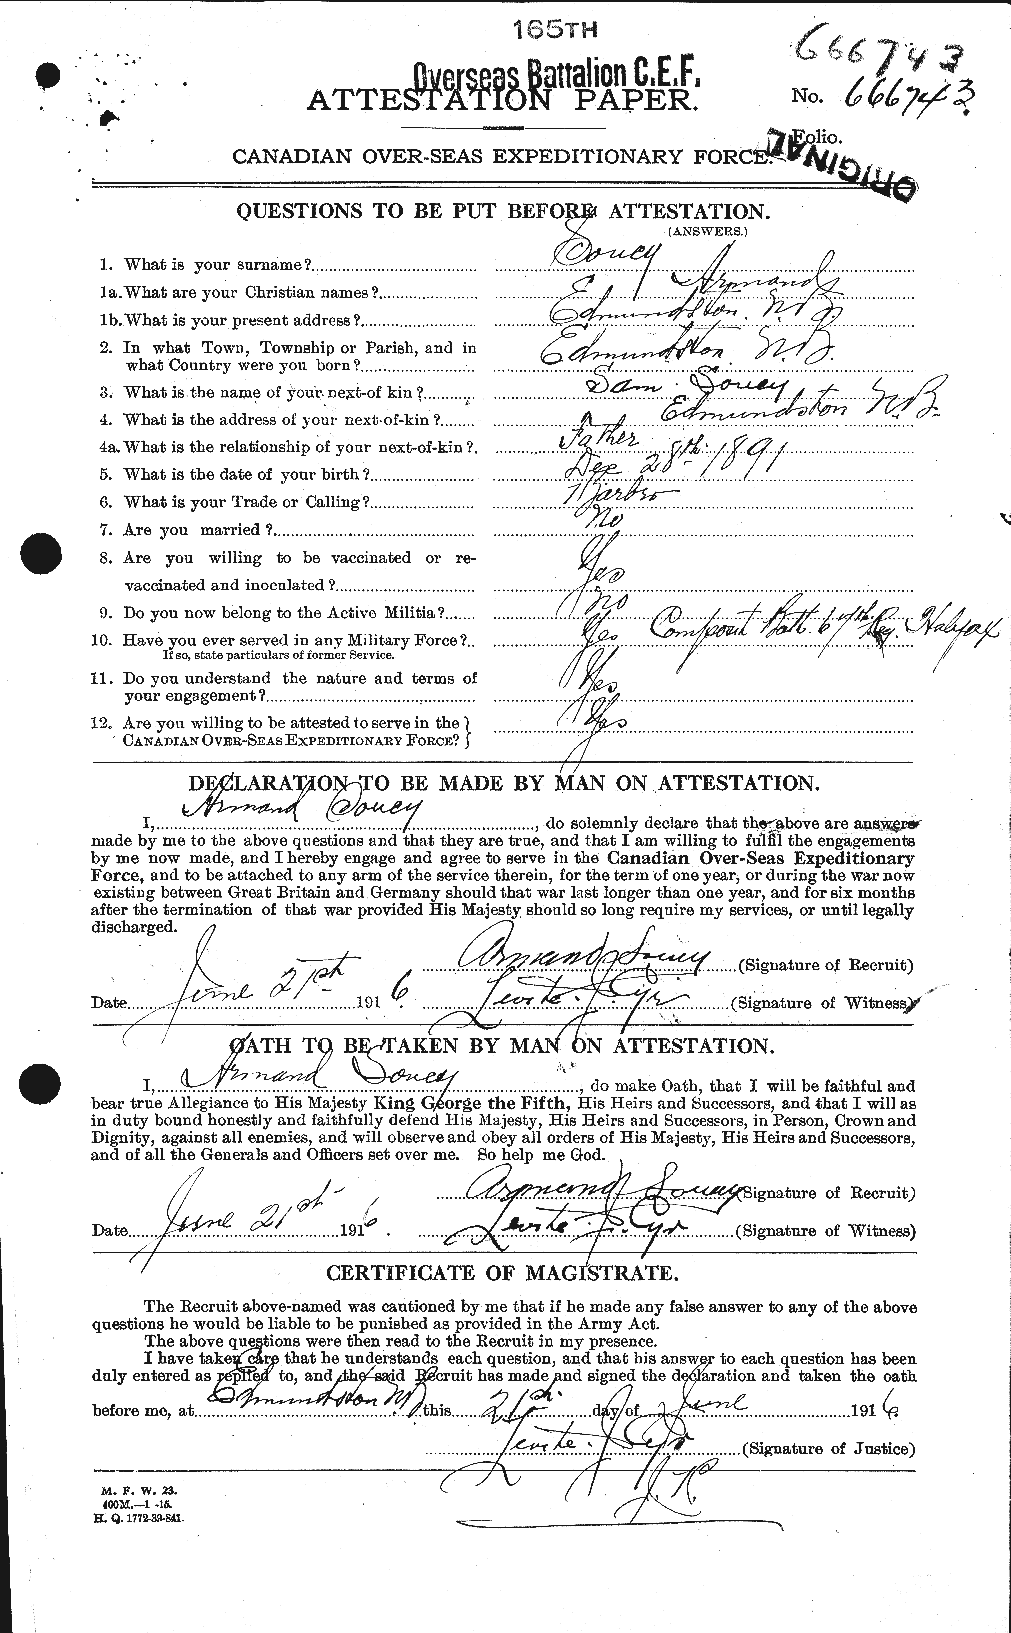 Personnel Records of the First World War - CEF 109576a